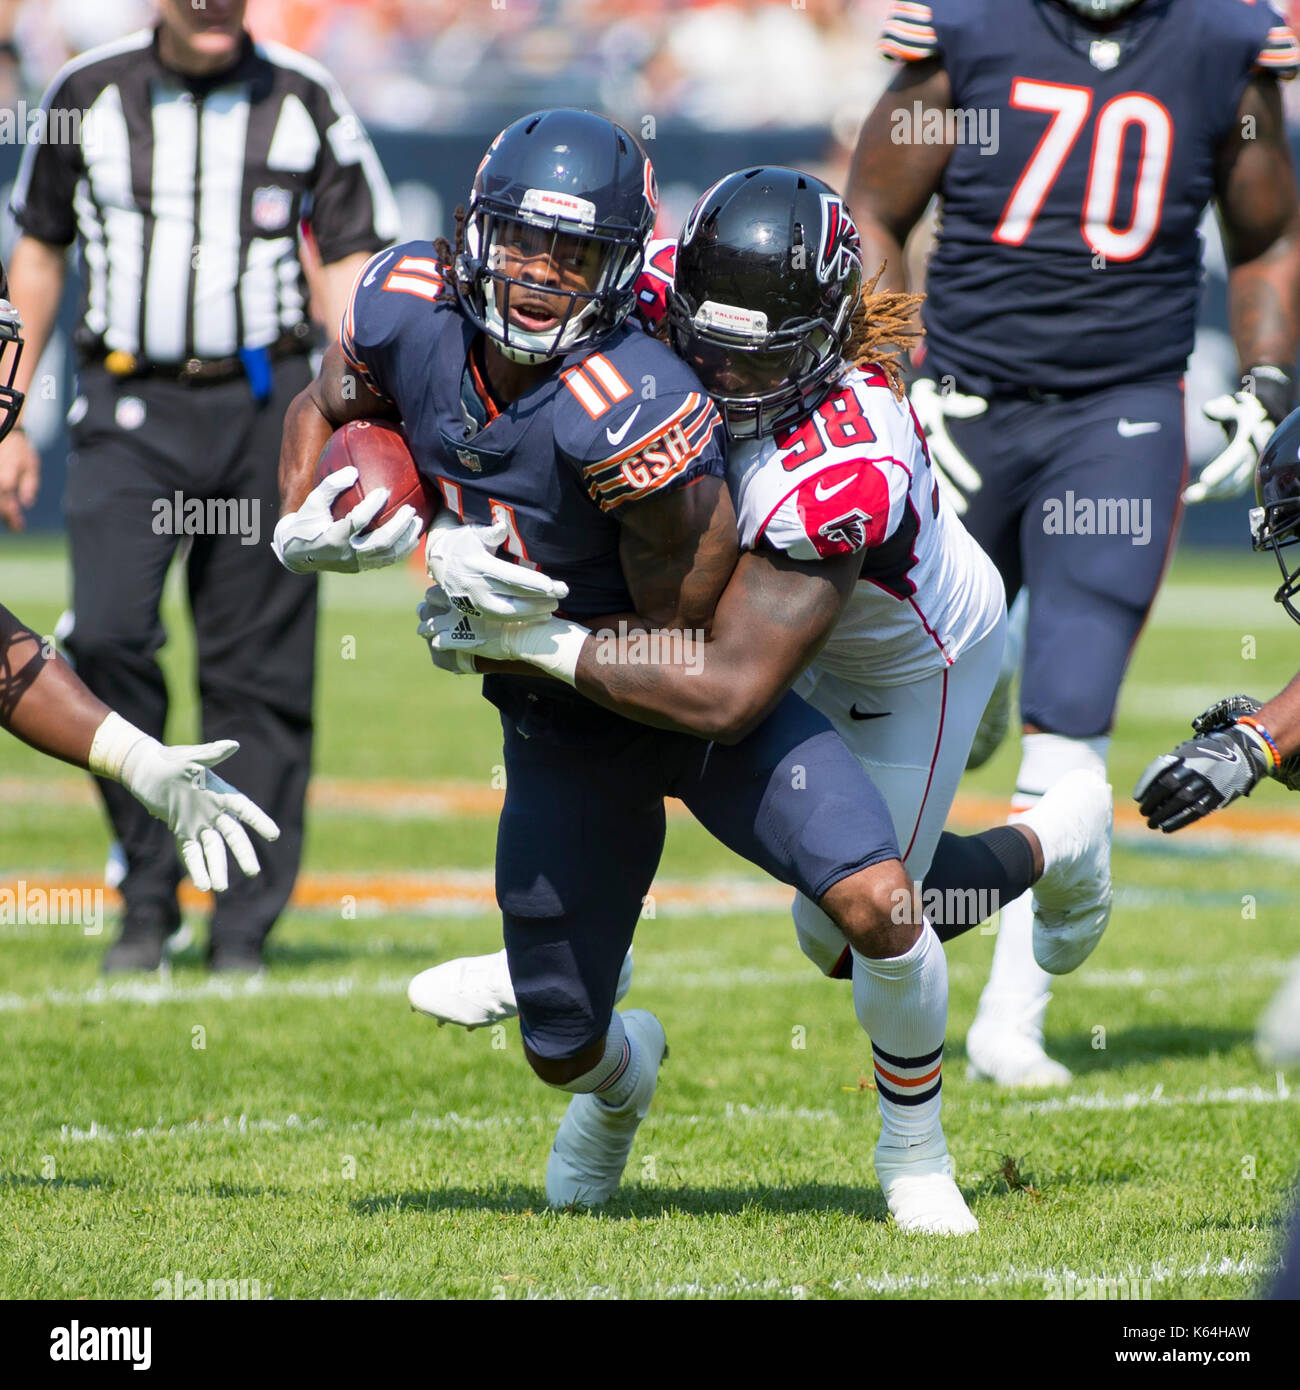 Chicago, Illinois, USA. 10th Sep, 2017. - Chicago Bears #11 Kevin White gets tackled from behind by Atlanta Falcons #98 Takkarist McKinley resulting in White's broken left collarbone during the NFL Game between the Atlanta Falcons and Chicago Bears at Soldier Field in Chicago, IL. Credit: csm/Alamy Live News Stock Photo